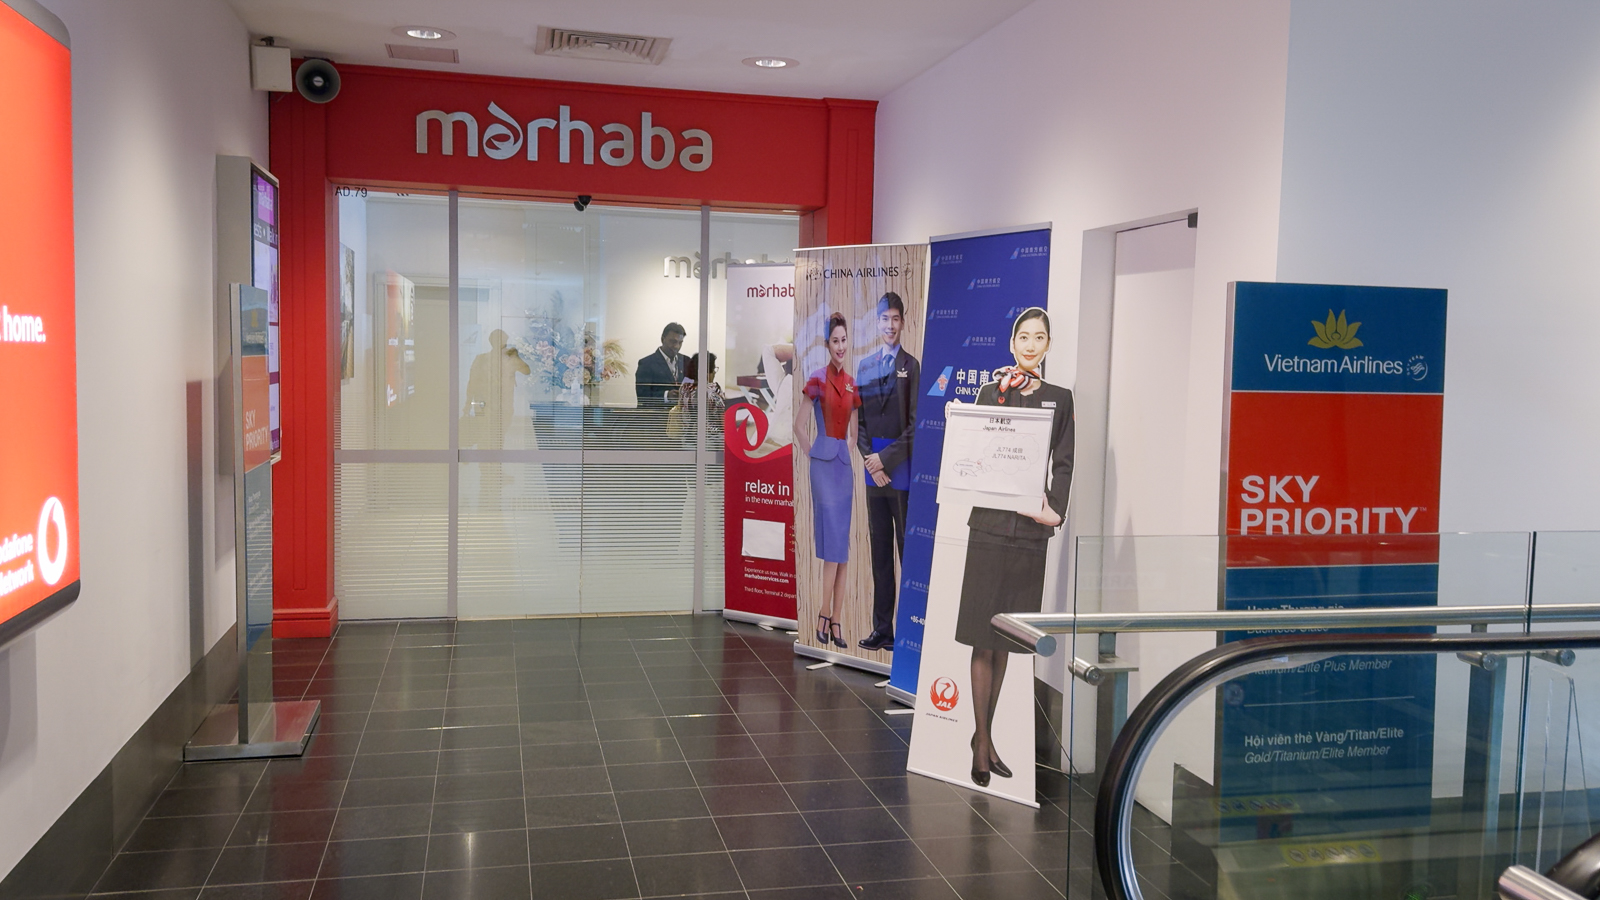 Entrance to Marhaba Lounge, Melbourne Airport